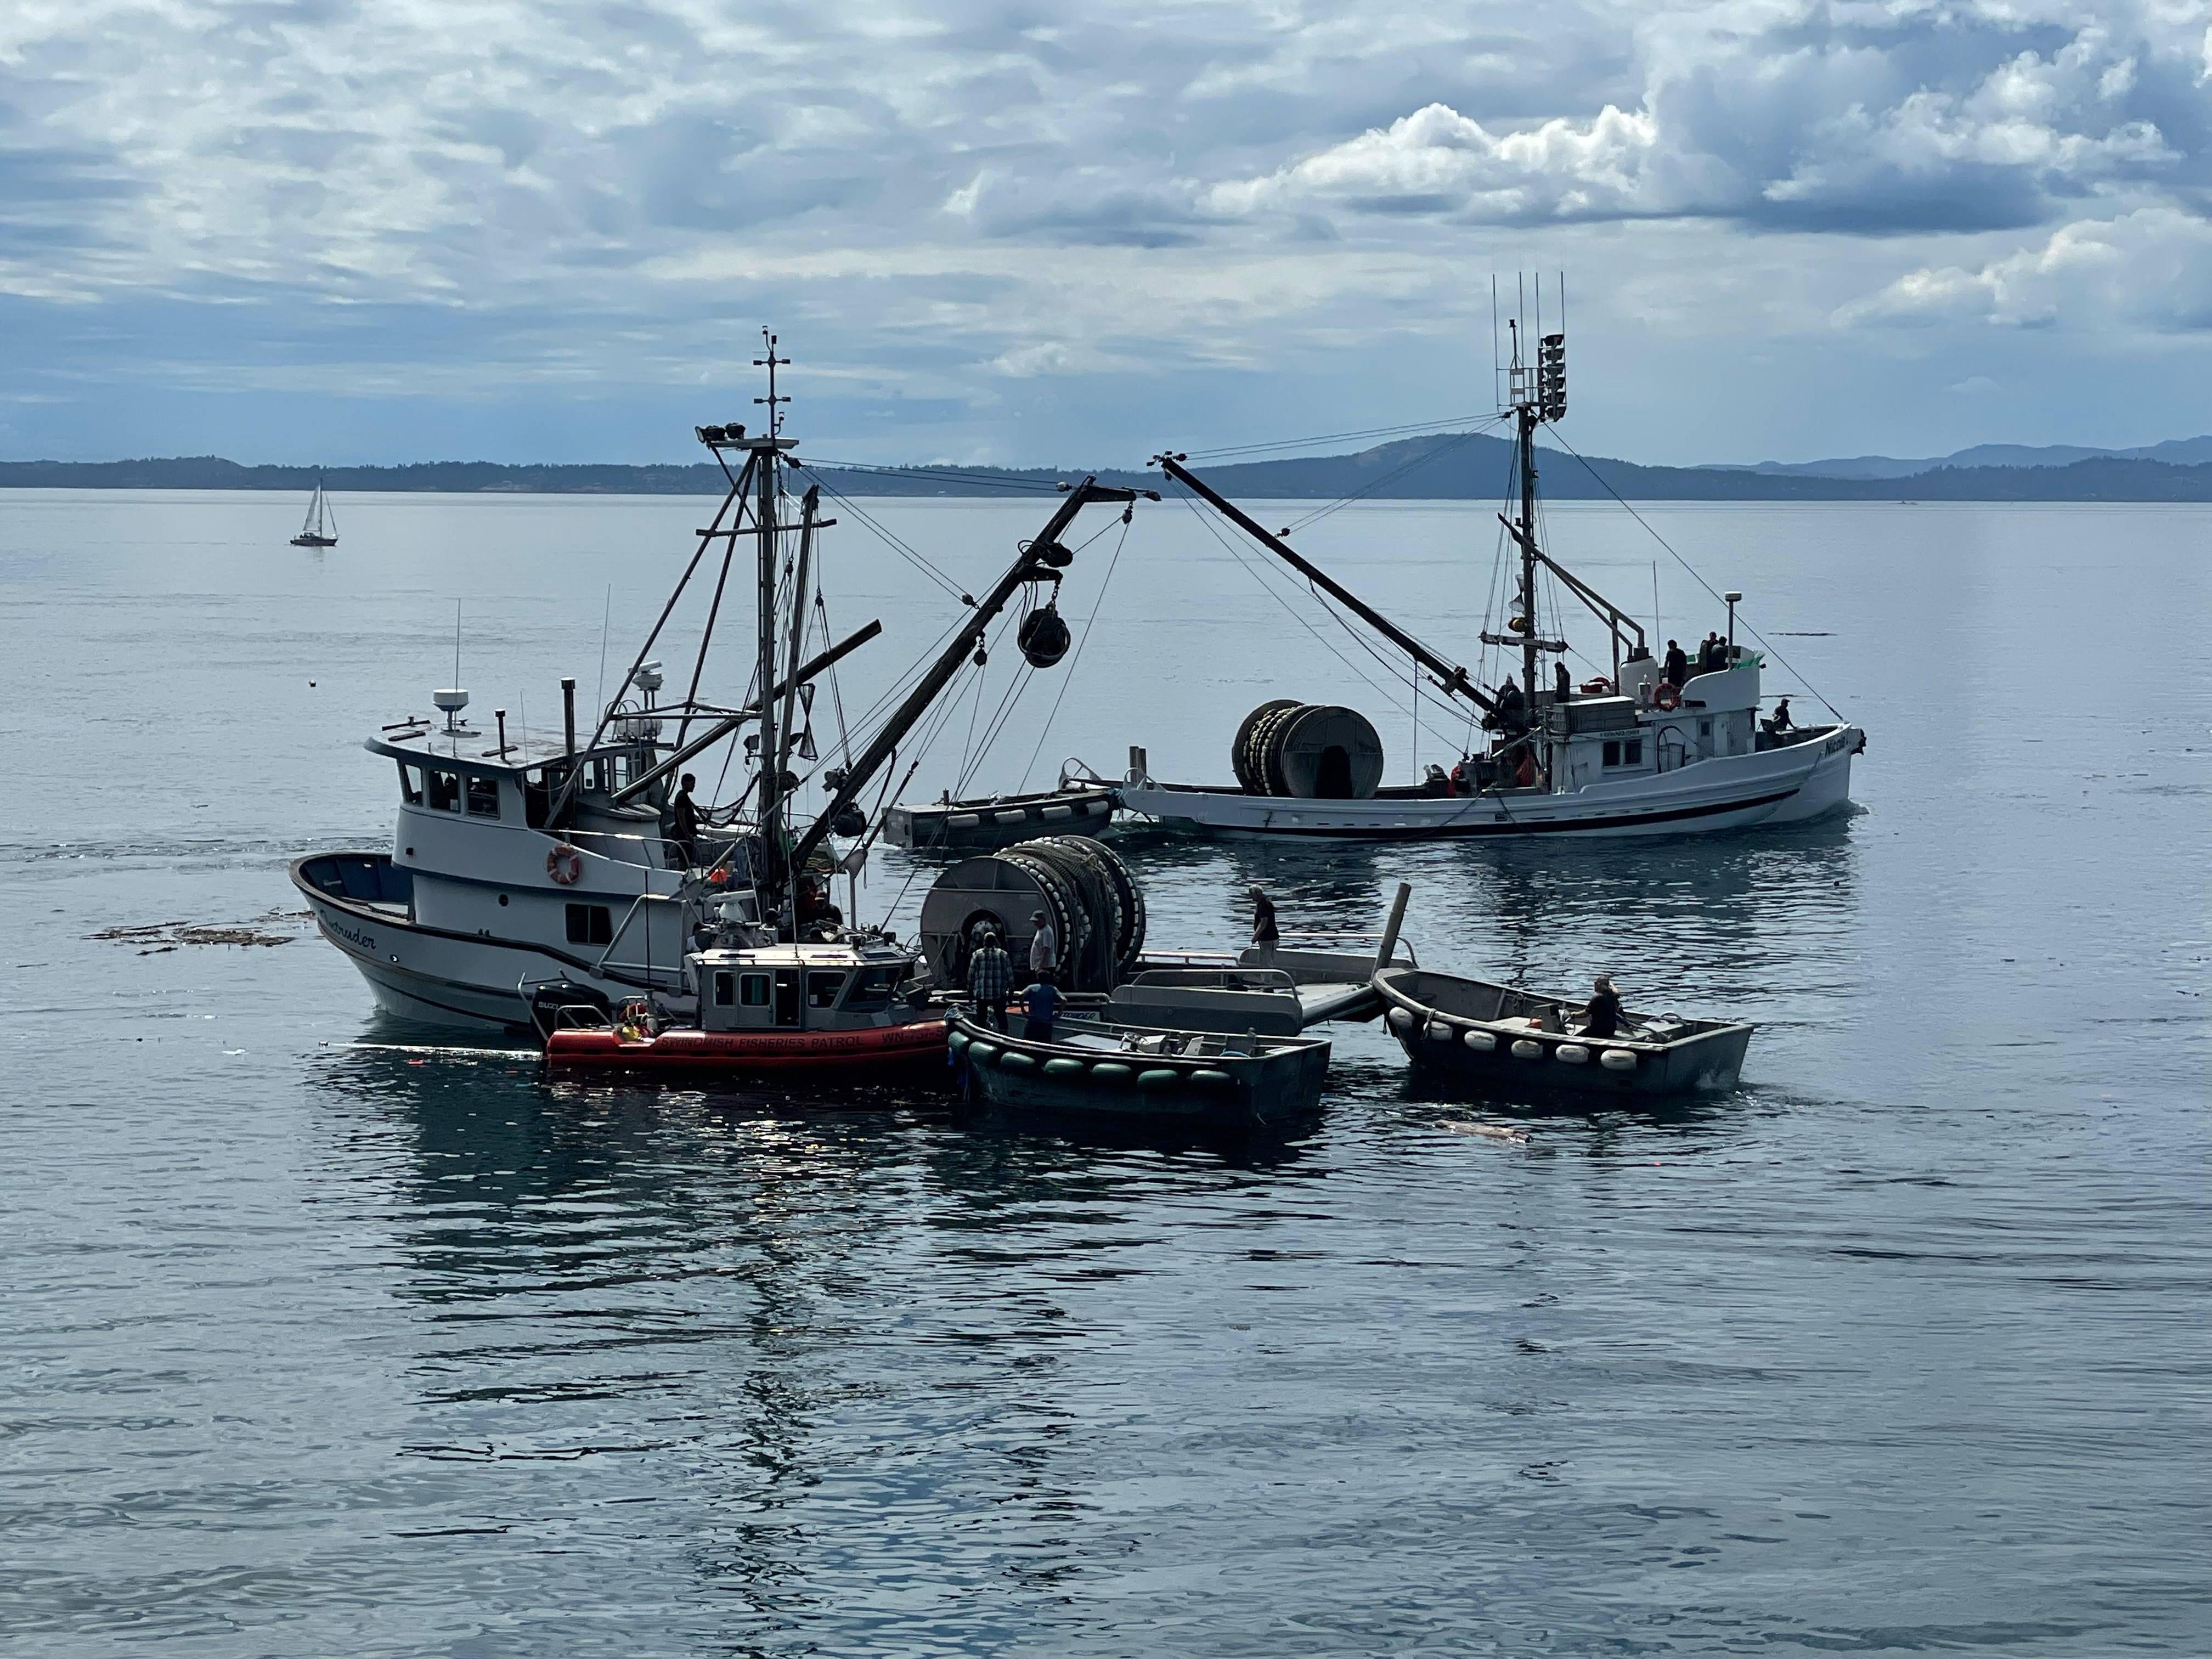 KUOW - Fishing boat that sank in orca waters ran into trouble 24